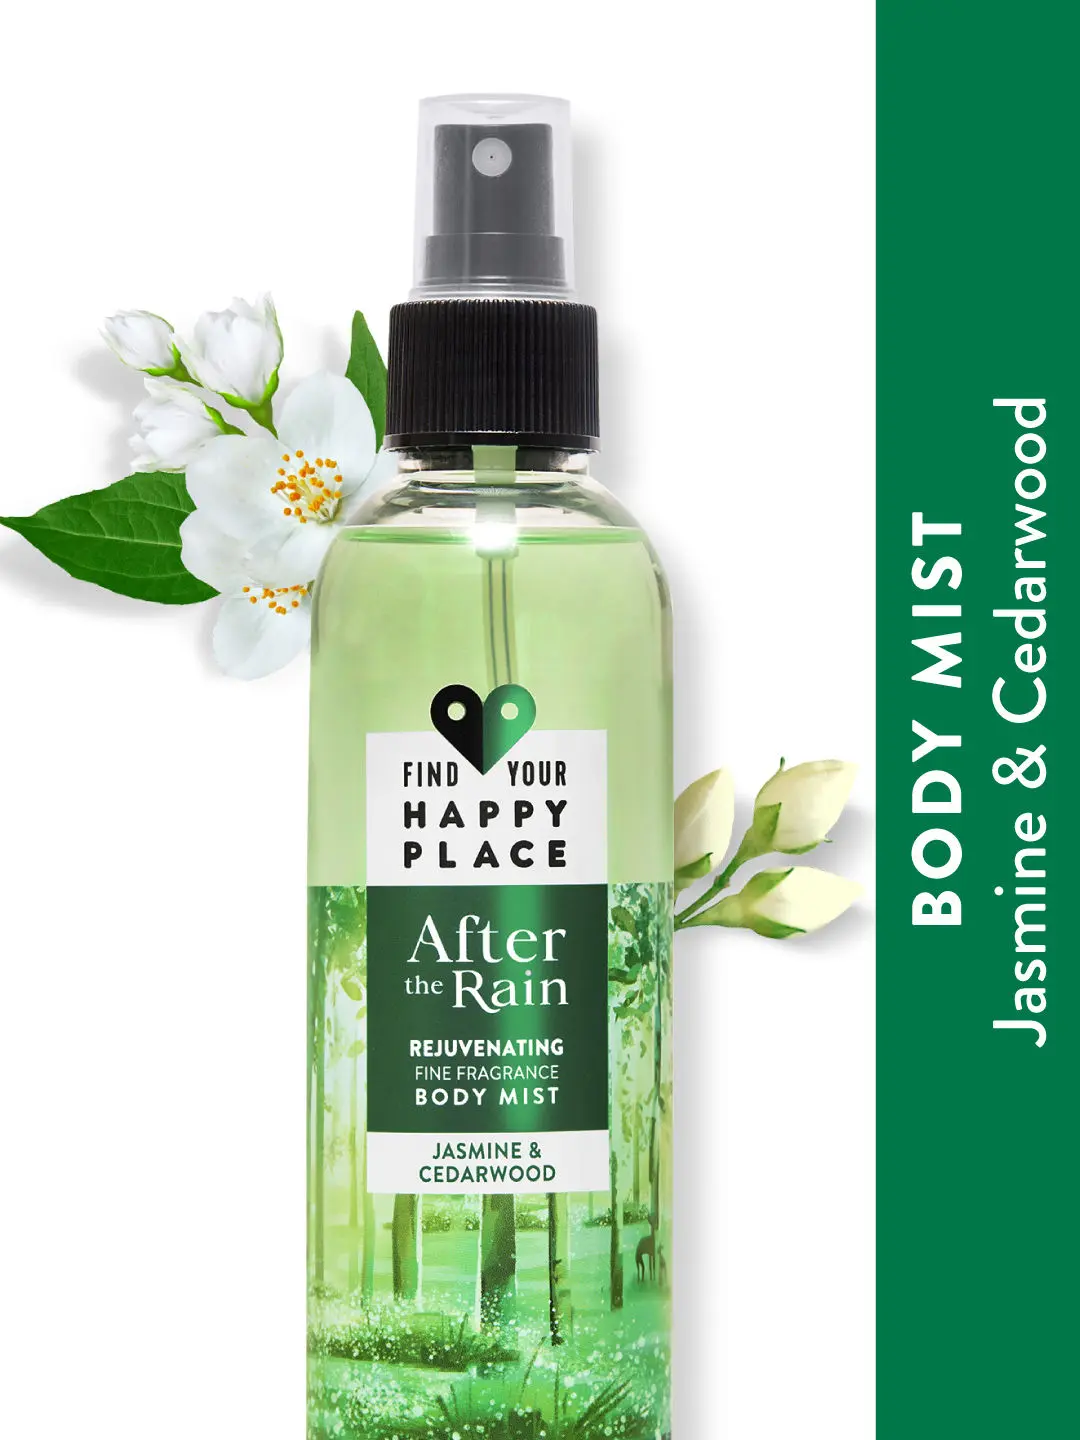 Find Your Happy Place - After The Rain Body Mist Jasmine & Cedarwood with Vitamin E 200ml